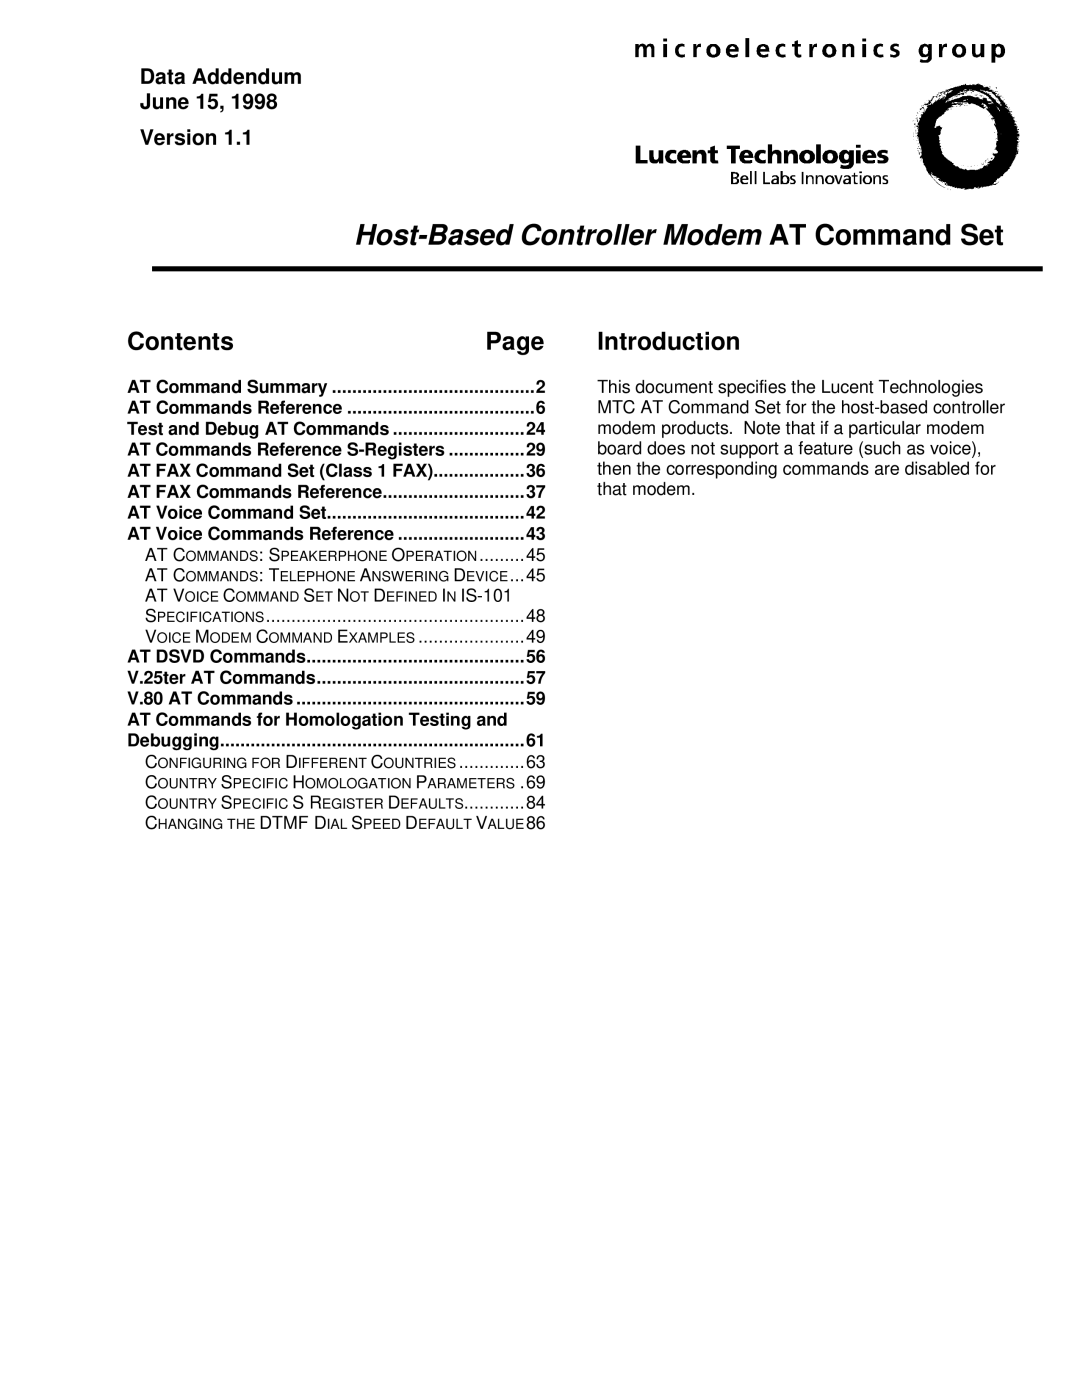 Lucent Technologies Host-Based Controller Modem AT specifications Contents, Introduction 